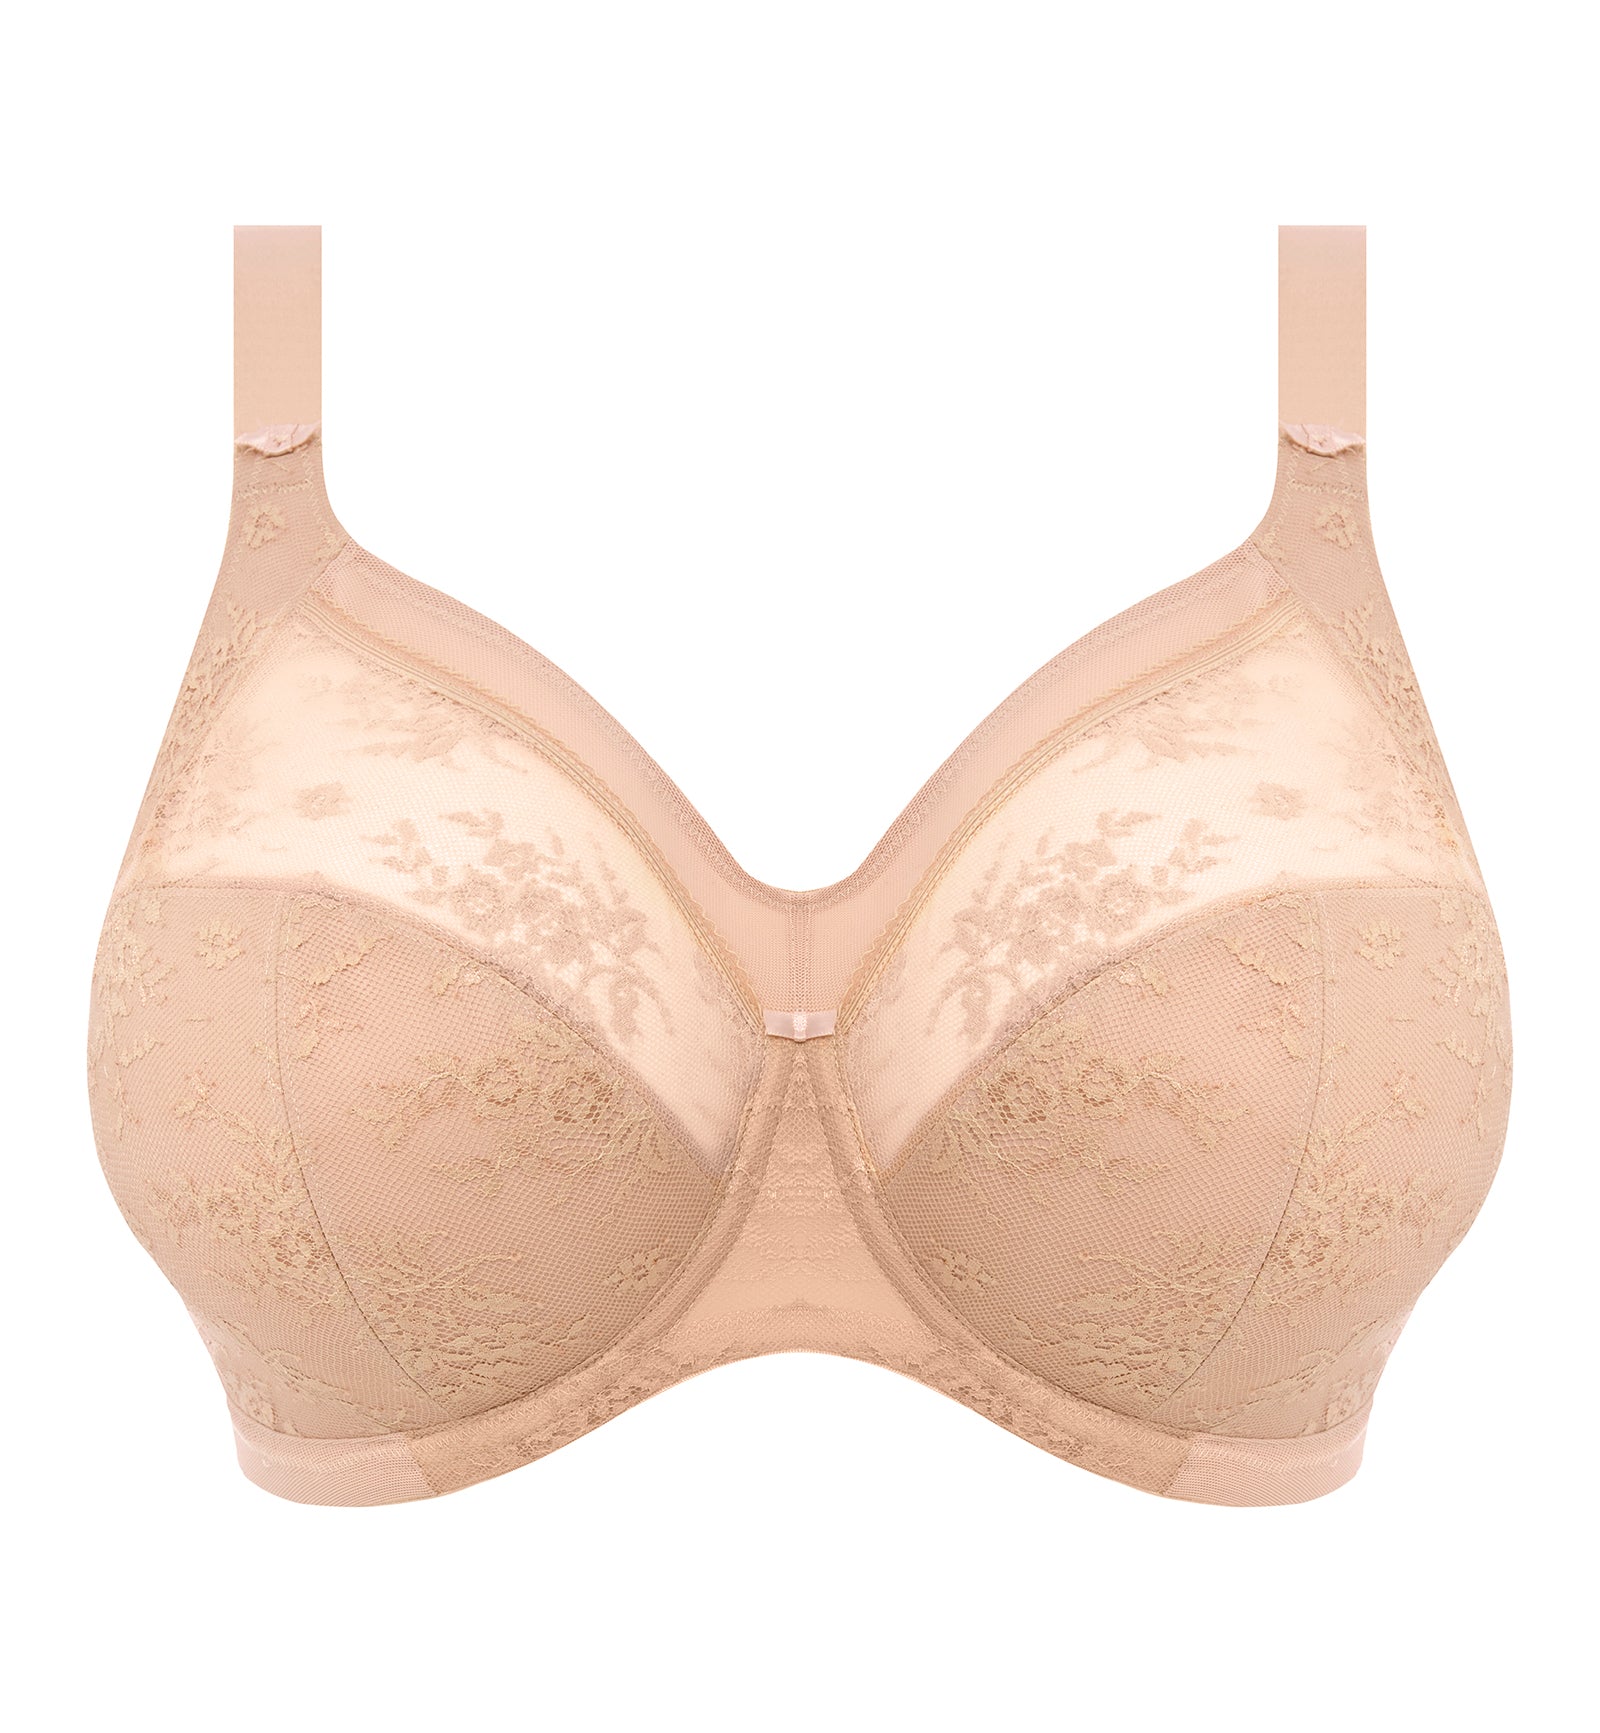 Goddess Verity Full Cup Underwire Bra (700204)- Fawn